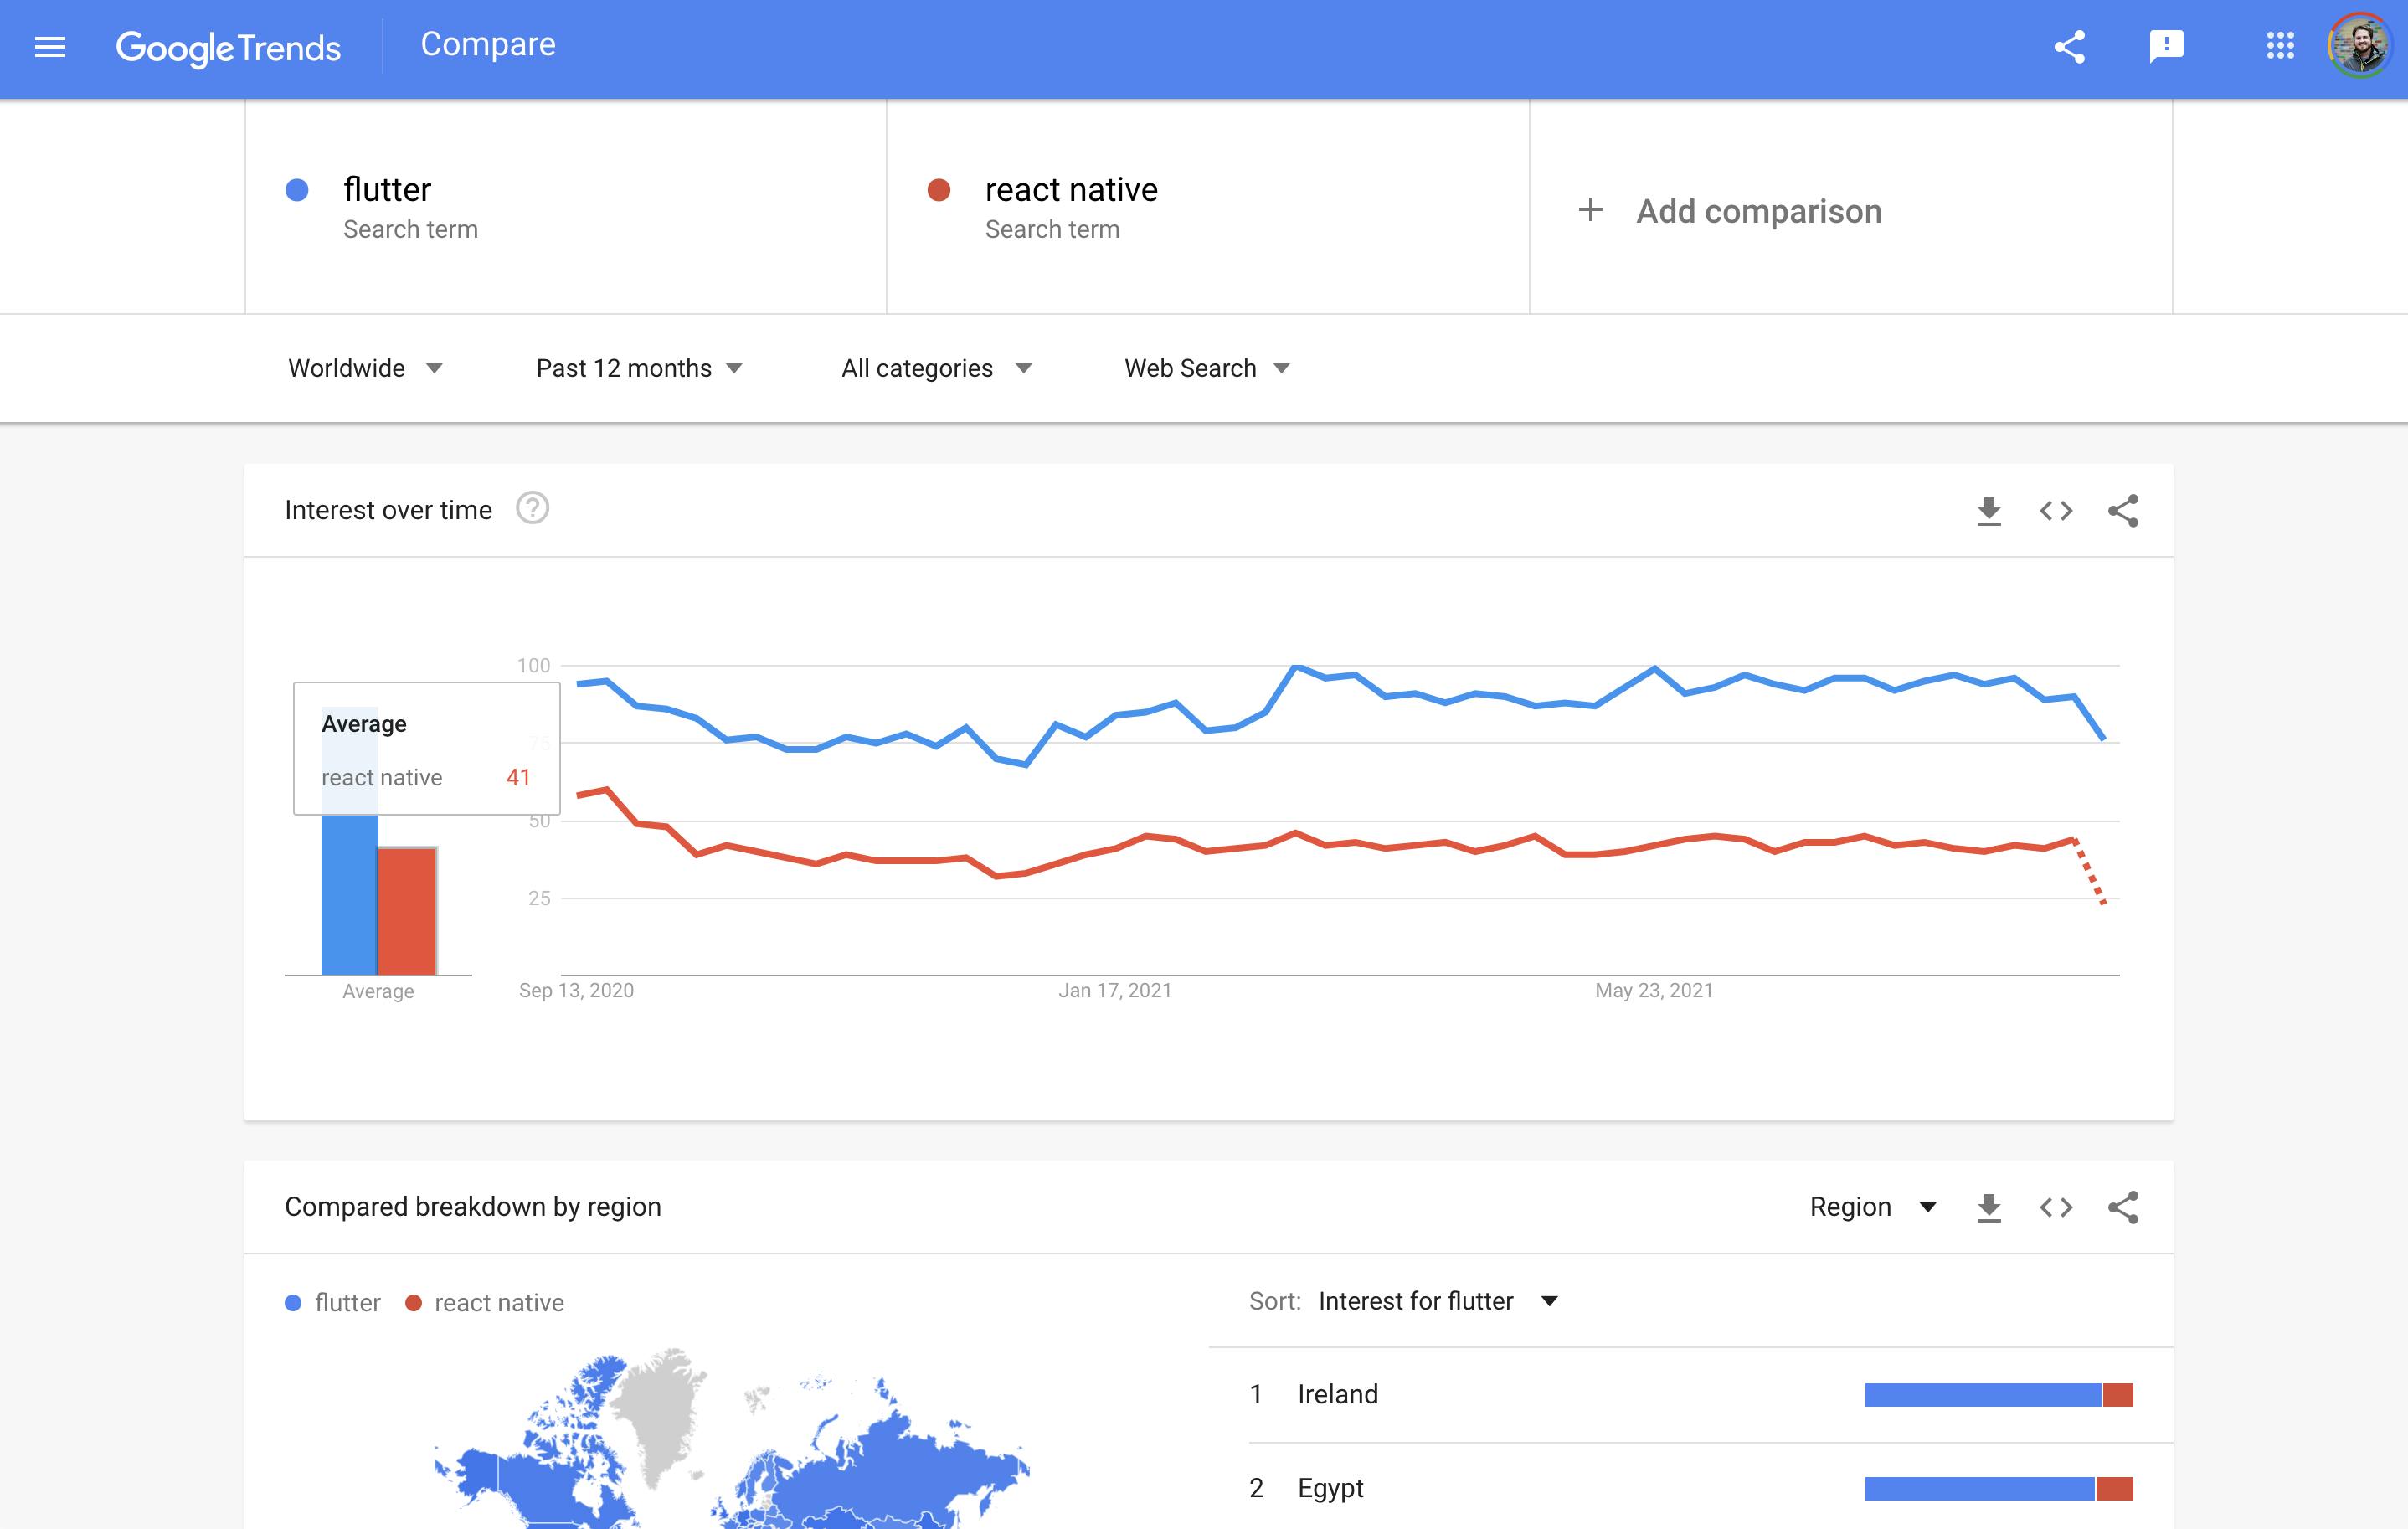 Google Trend data showing the interest in React Native and Flutter over the last year.